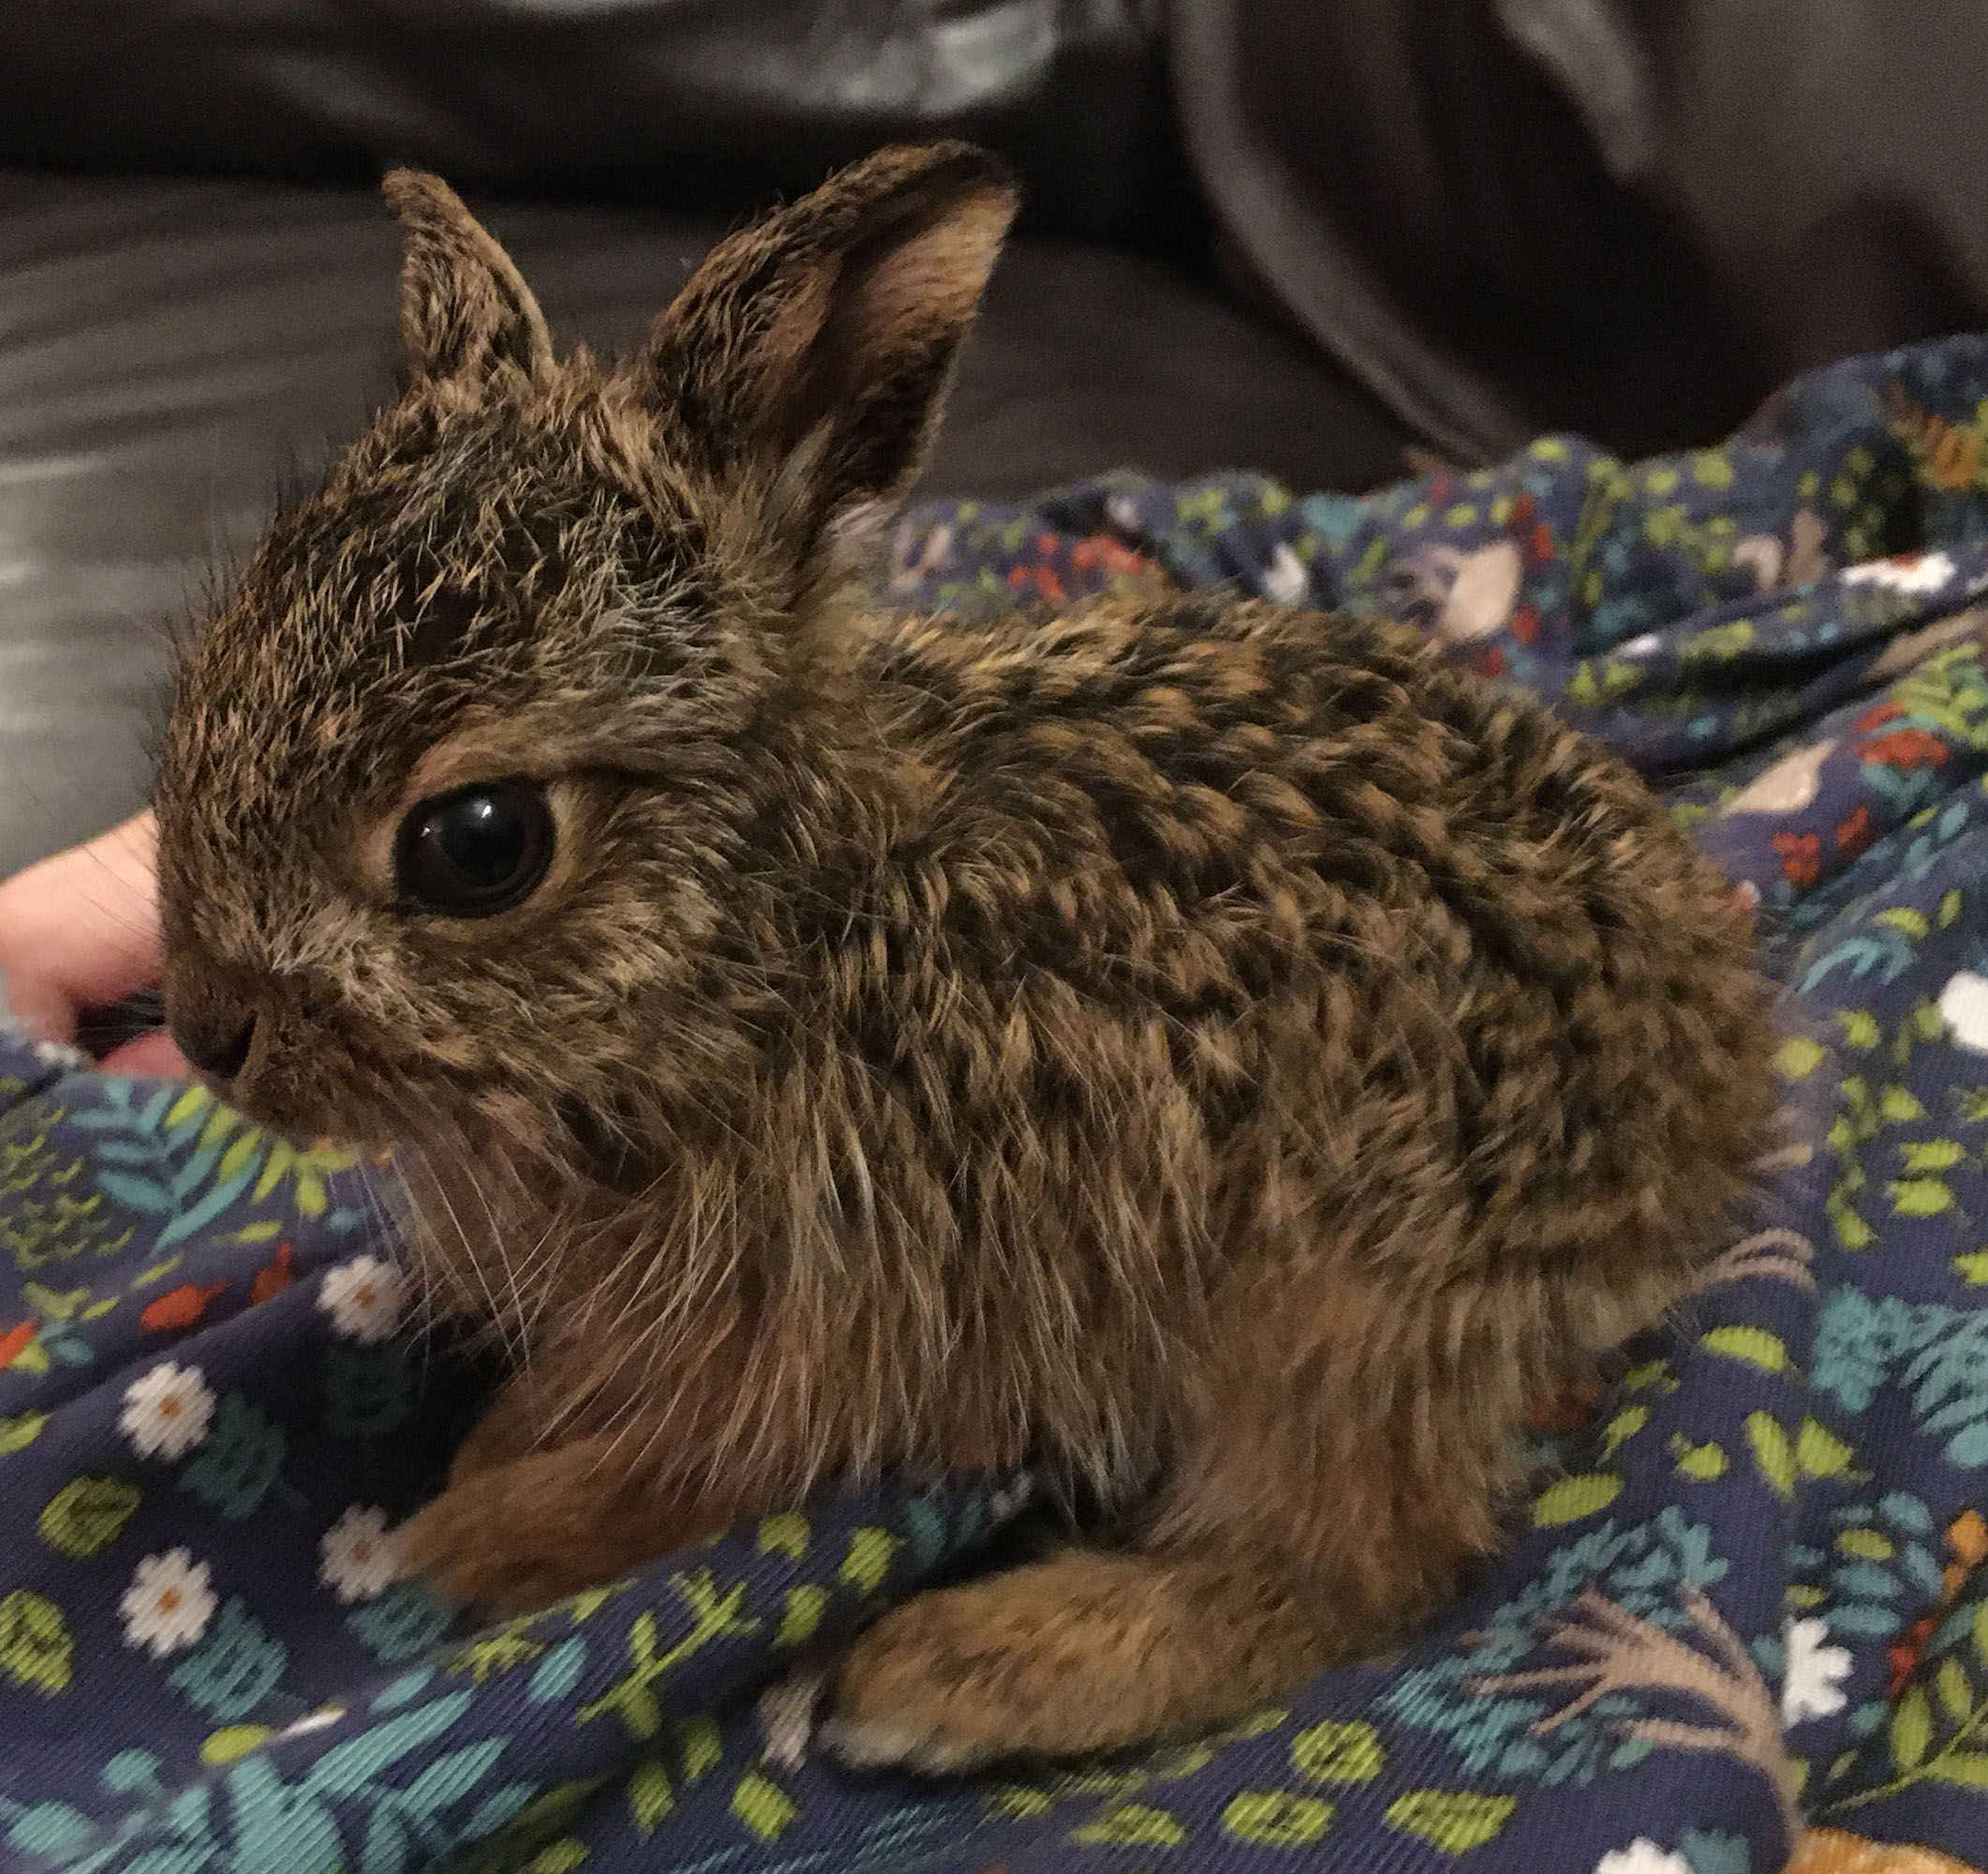 Clover the hare as a baby